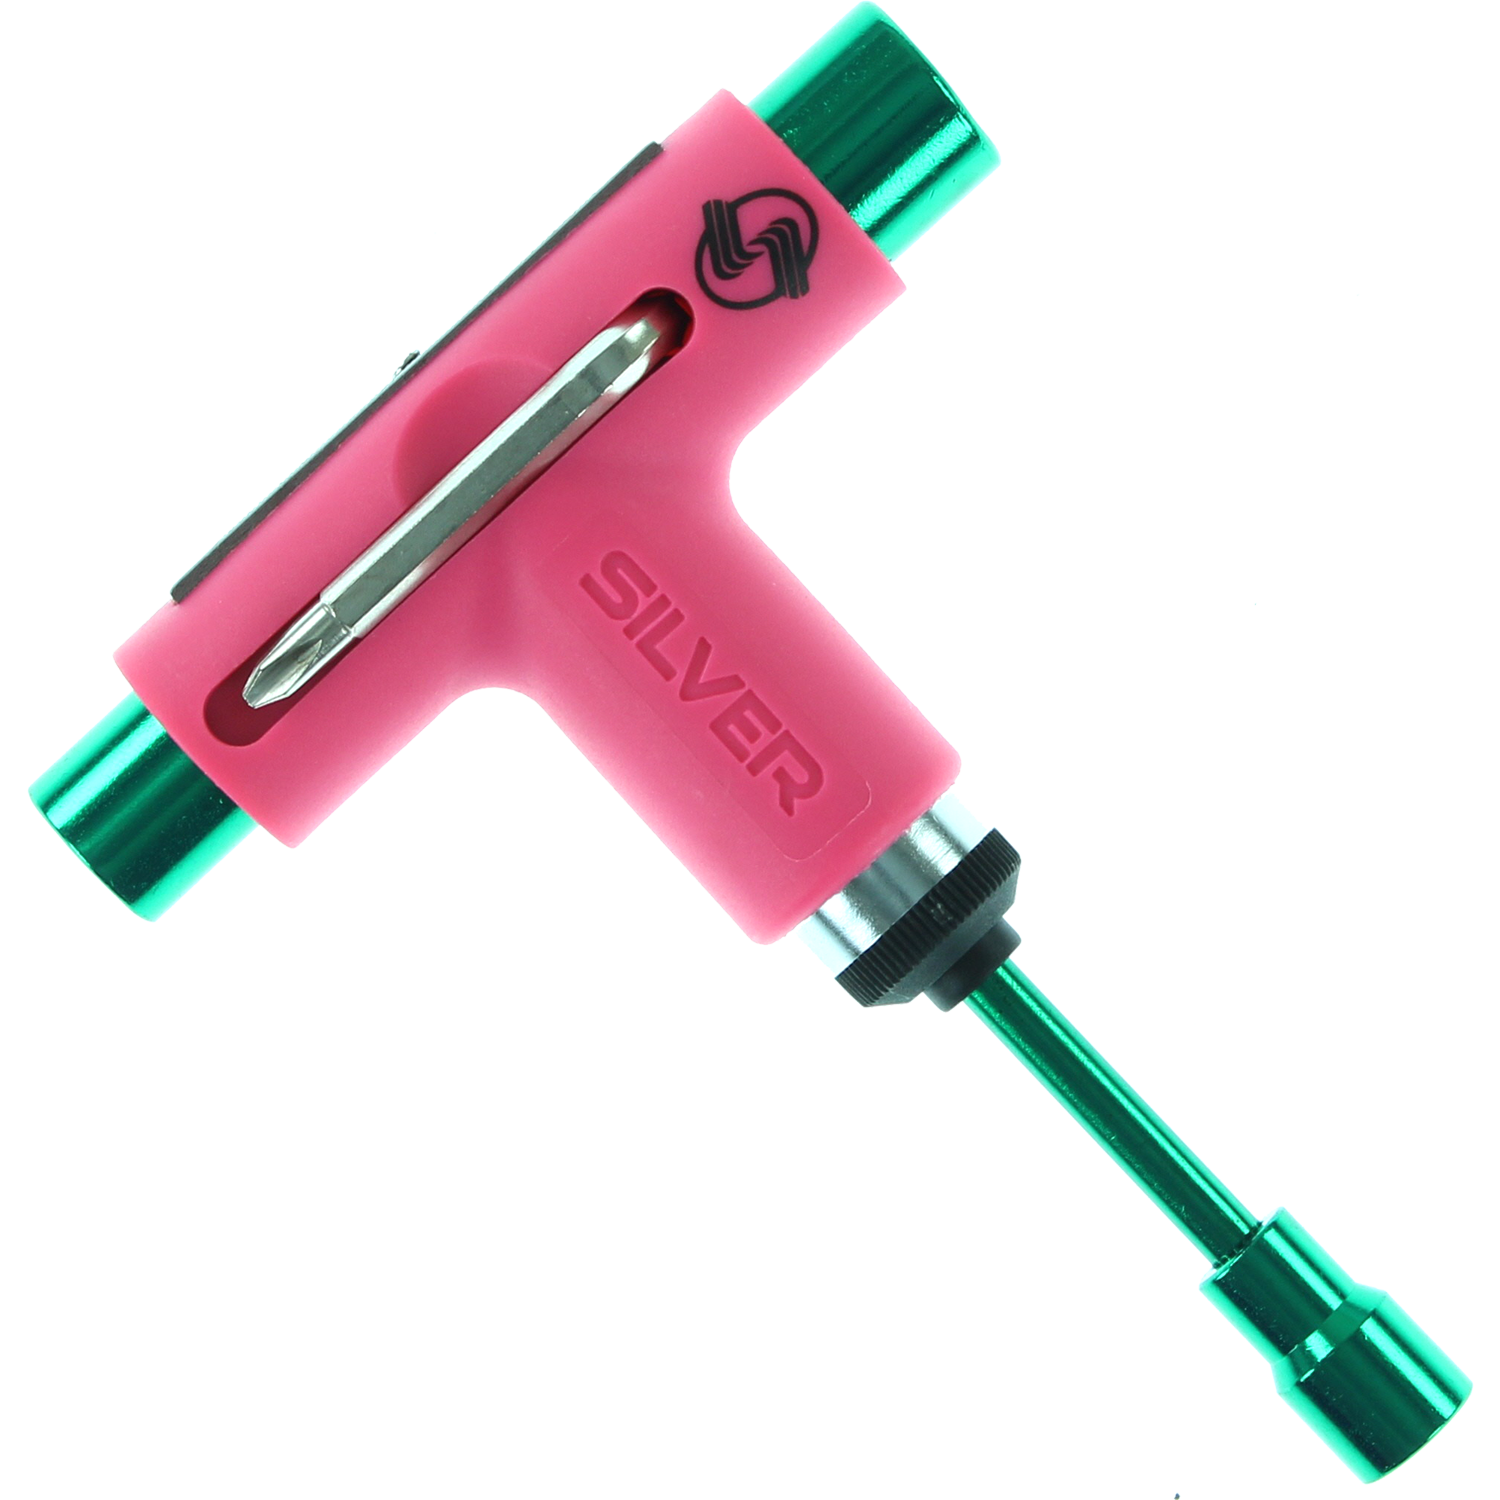 Silver SKATE TOOL Neon Pink/Green | Universo Extremo Boards Skate & Surf